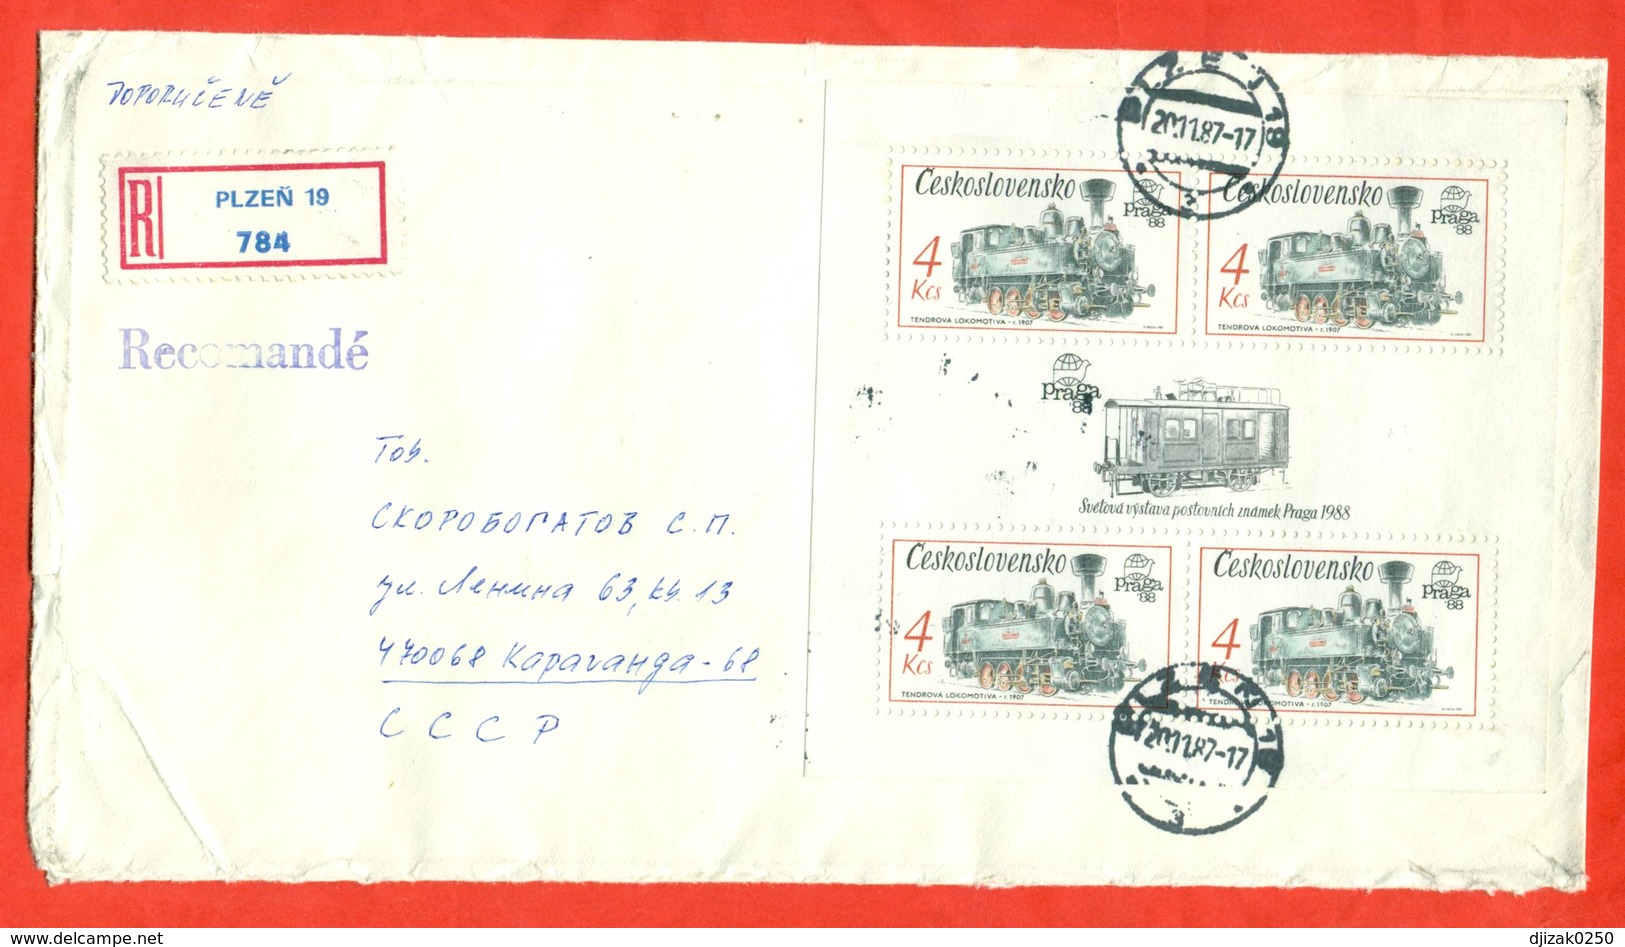 Czechoslovakia 1987.Locomotive. Small Sheet. Registered Envelope Is Really Past Mail. - Covers & Documents